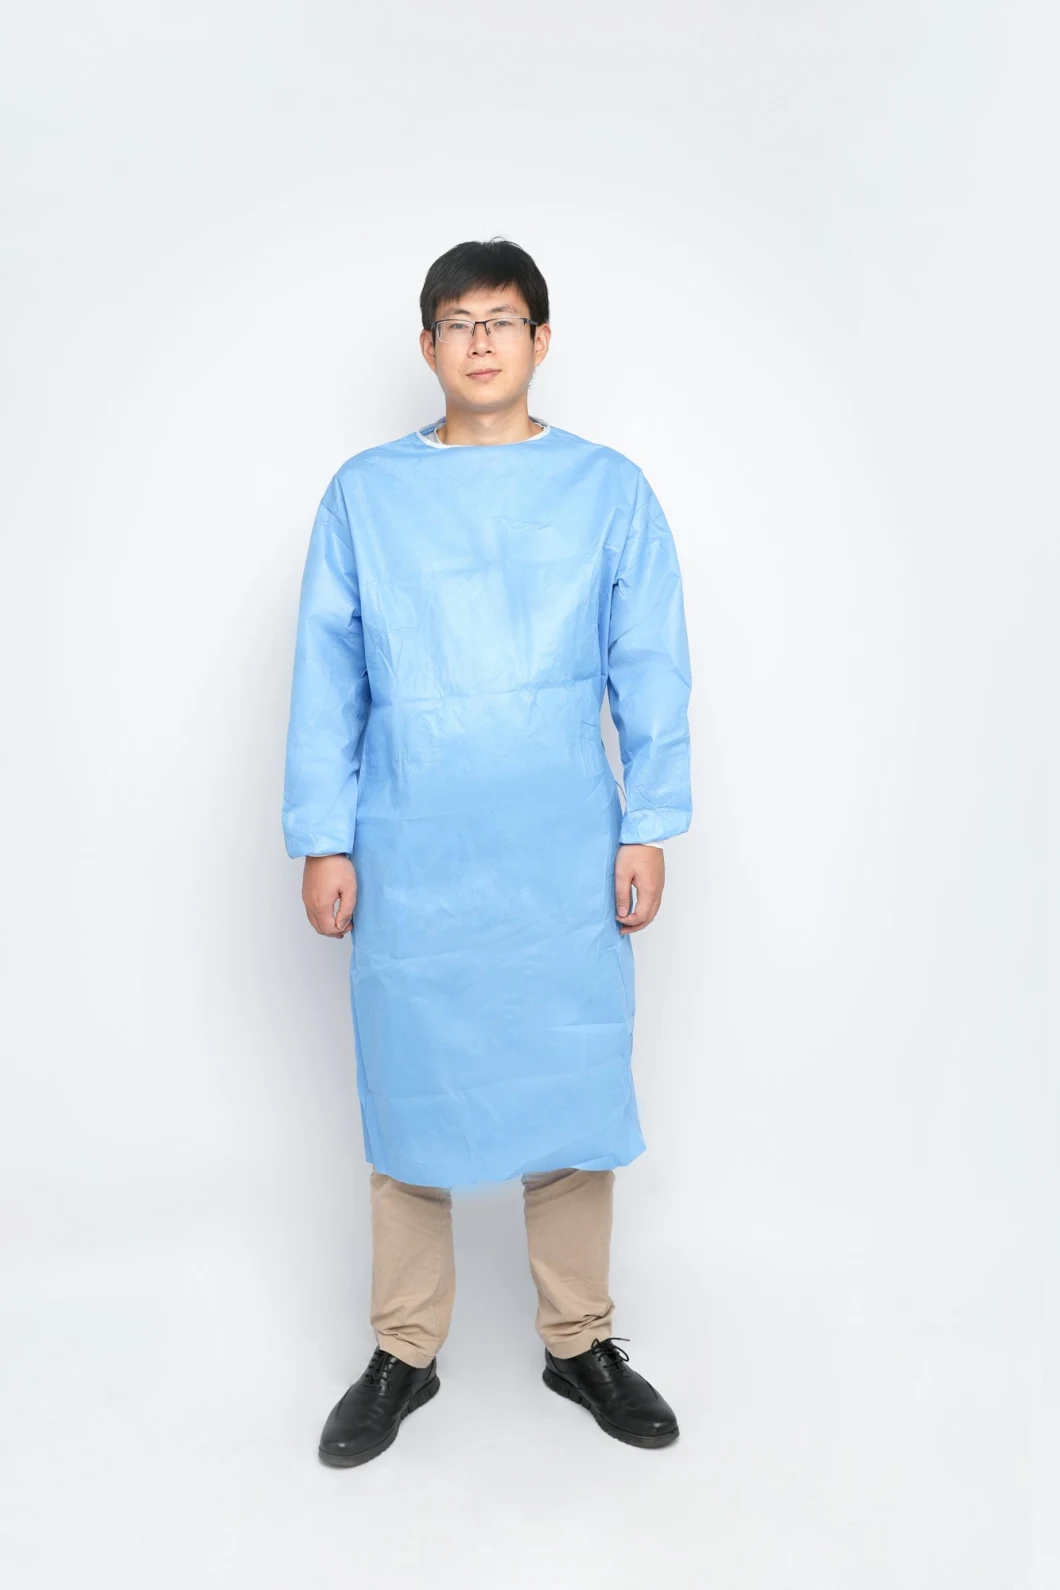 Protection Anti-Virus Coverall PPE Workwear Siamese Chemical Protection Workwear Operation Safety Waterproof Coveralls/Gown